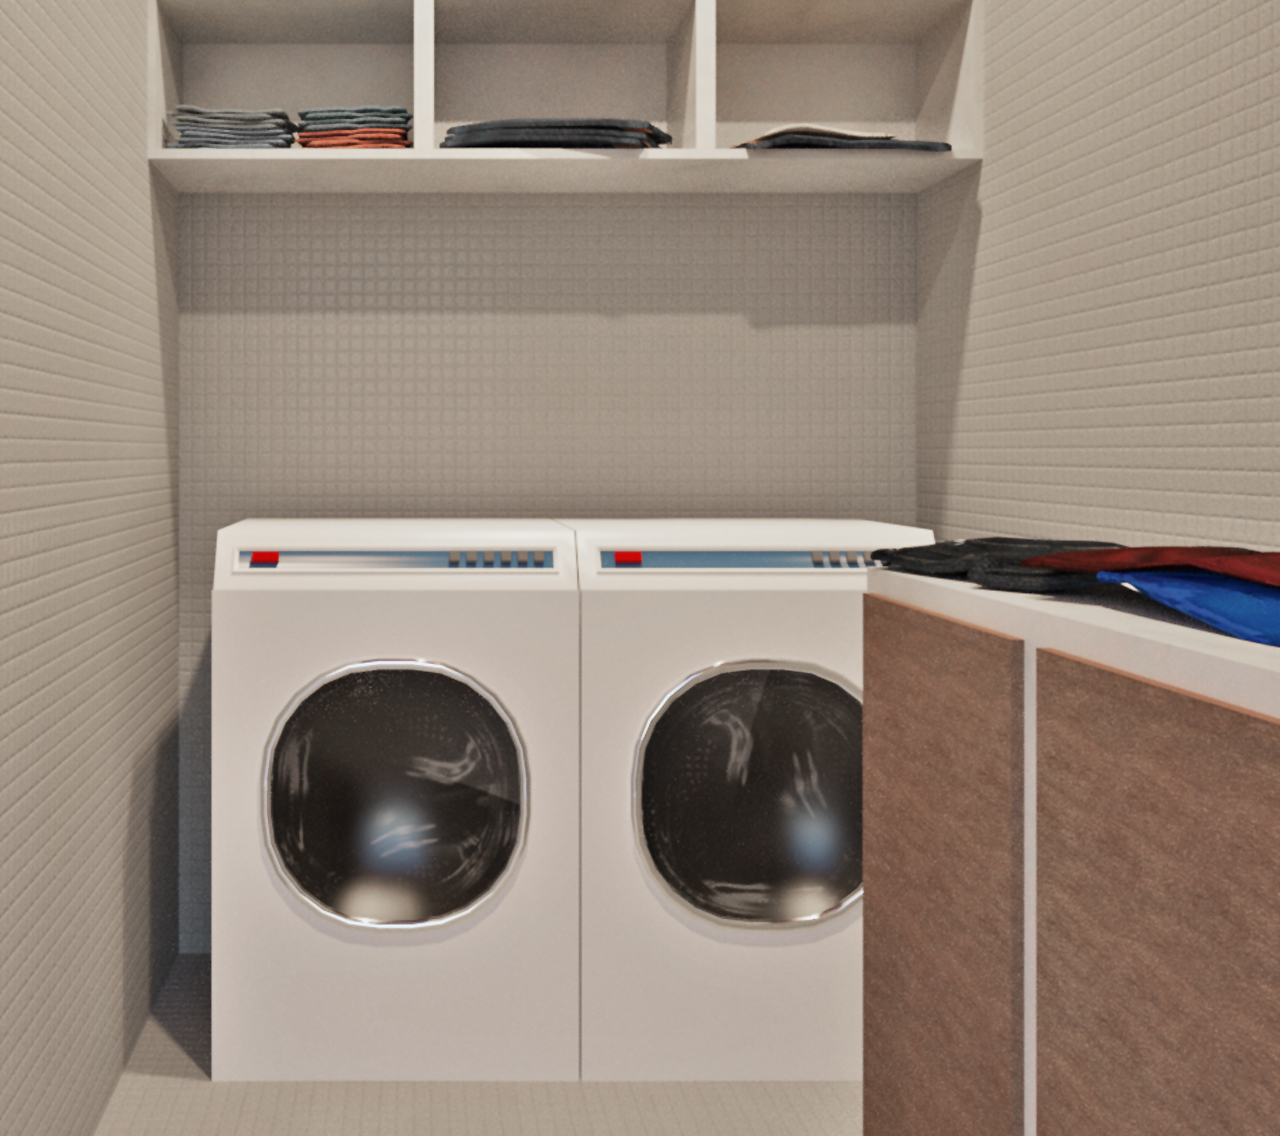 INT. LAUNDRY ROOM – DAY